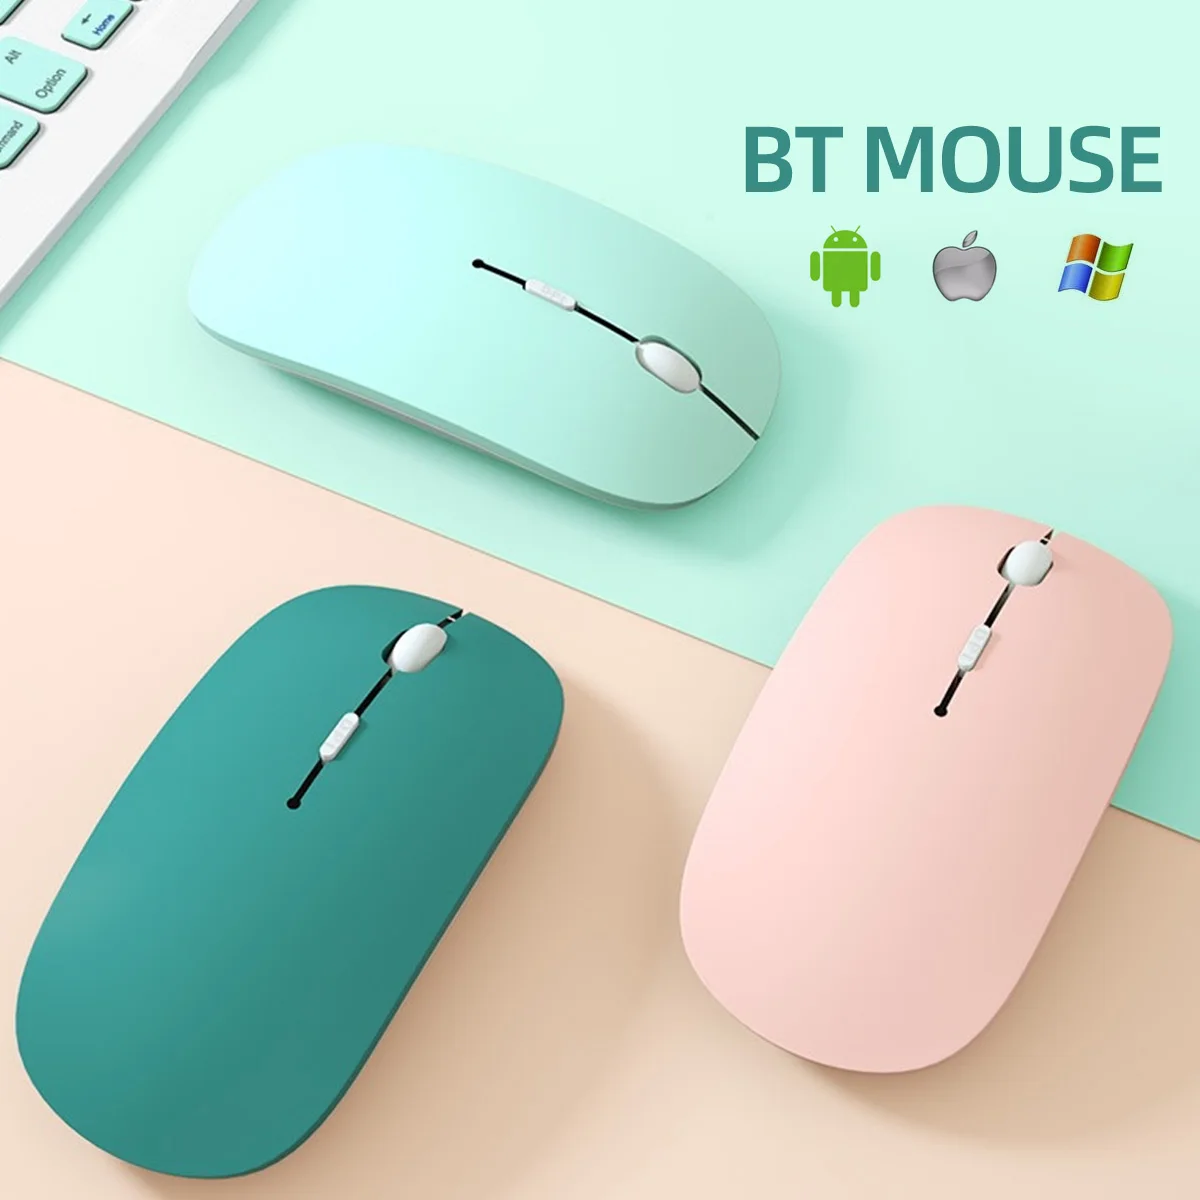 Mouse Bluetooth per iPad Samsung Huawei Lenovo Android Windows Tablet batteria Mouse Wireless per Computer Notebook